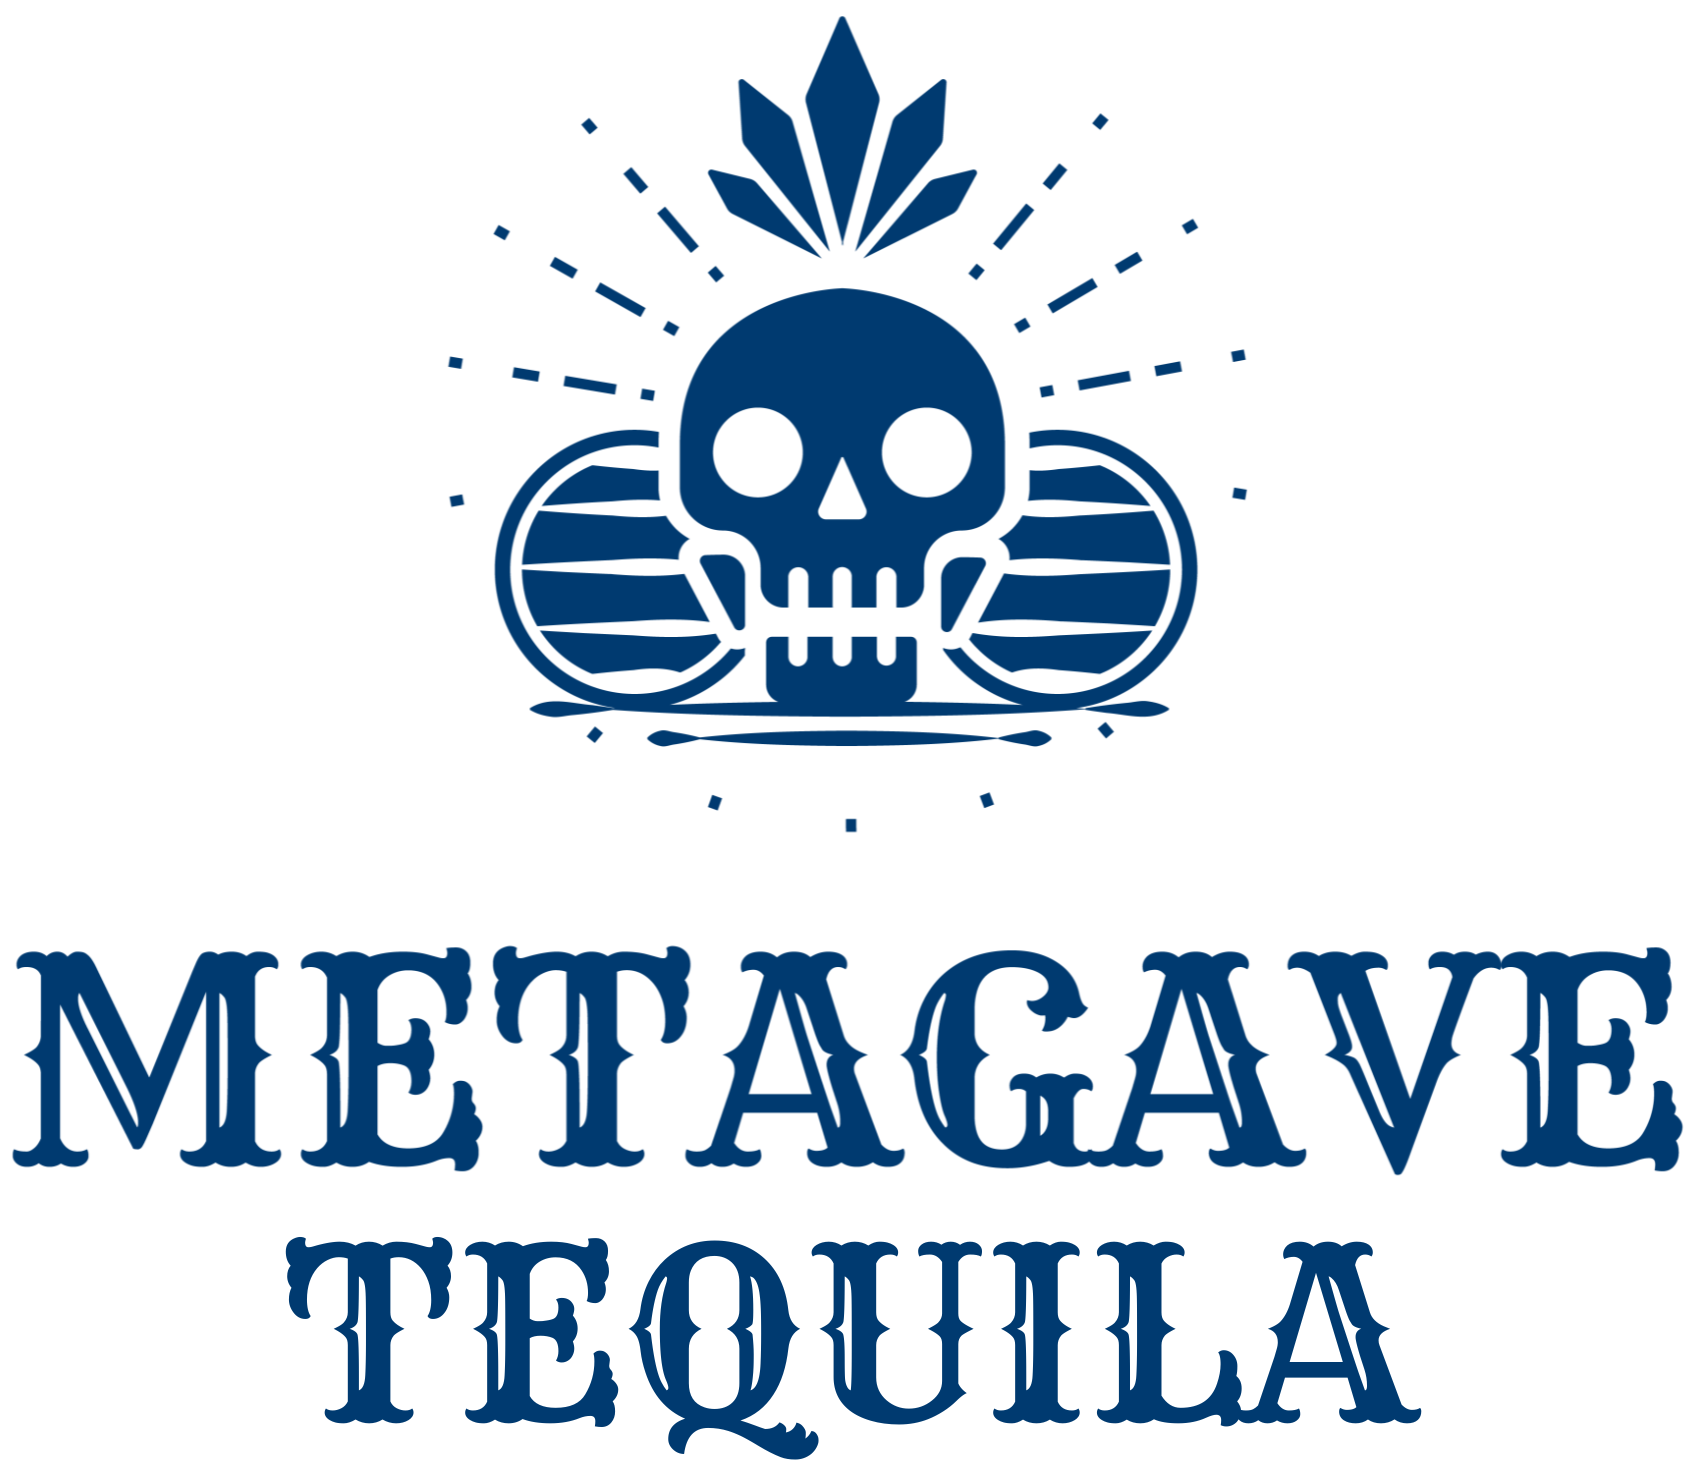 Metagave Tequila